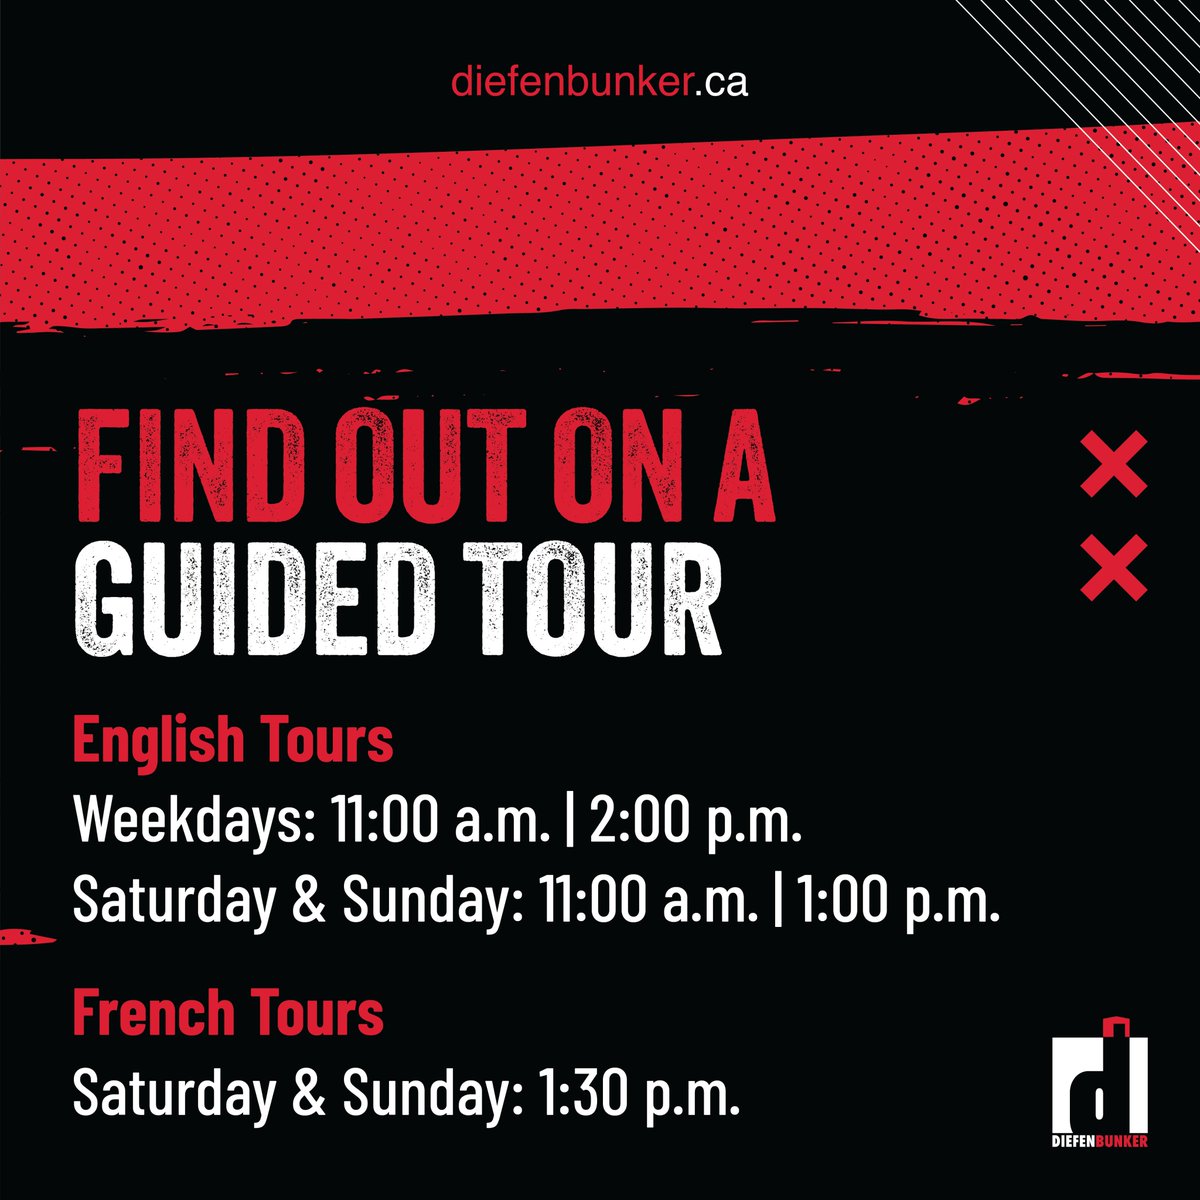 Do you know what’s beneath the surface? Visit the Diefenbunker and find out with a guided tour. Spend the day underground in Canada’s Cold War military bunker, now a one-of-a-kind museum and national historic site. Plan your visit and book tickets: diefenbunker.ca